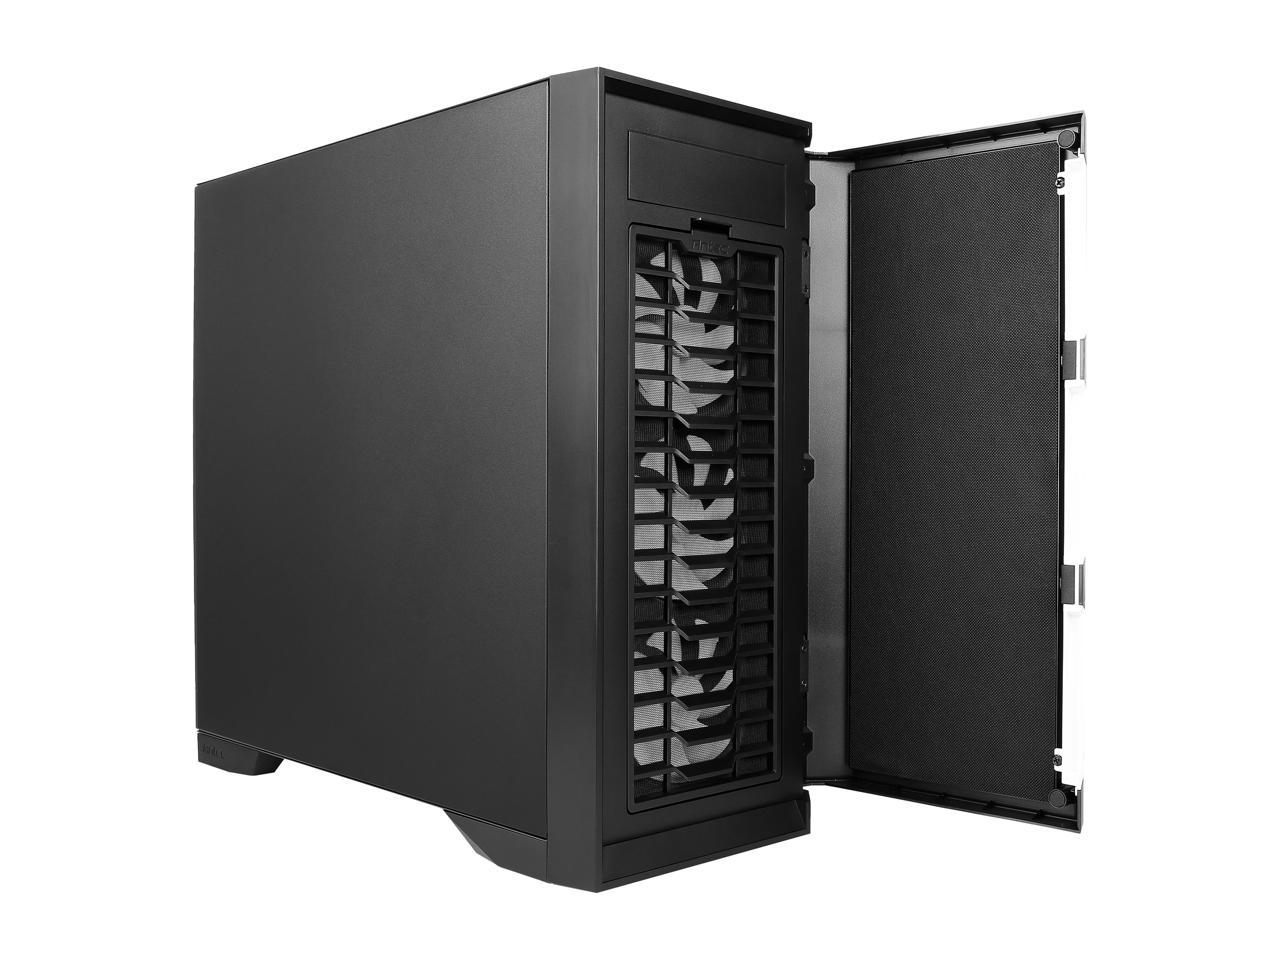 Antec Performance Series P101 Silent Black 0.8mm SPCC ATX Mid Tower Case with 8 x 3.5" HDD / 2.5" SSD Removable Bays